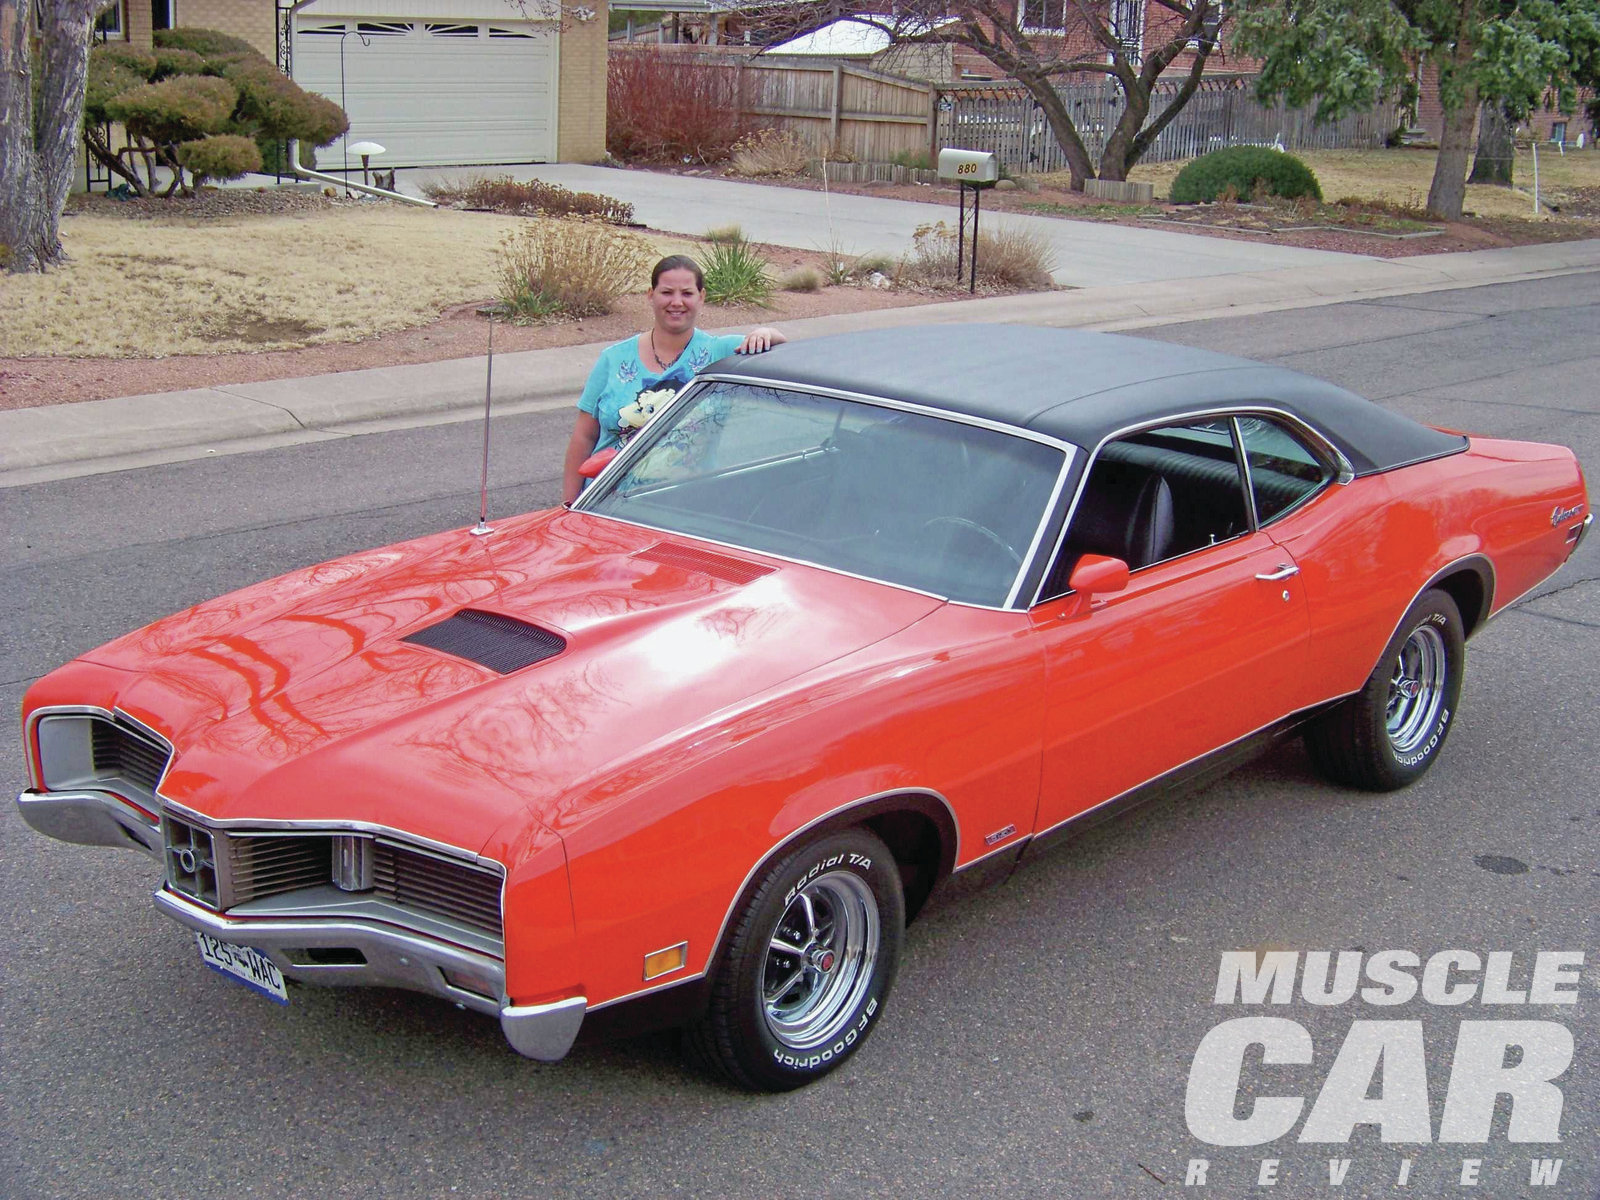 1970-mercury-cyclone-gt-front-driver-side-with-owener-lisa-tomlinson.jpg